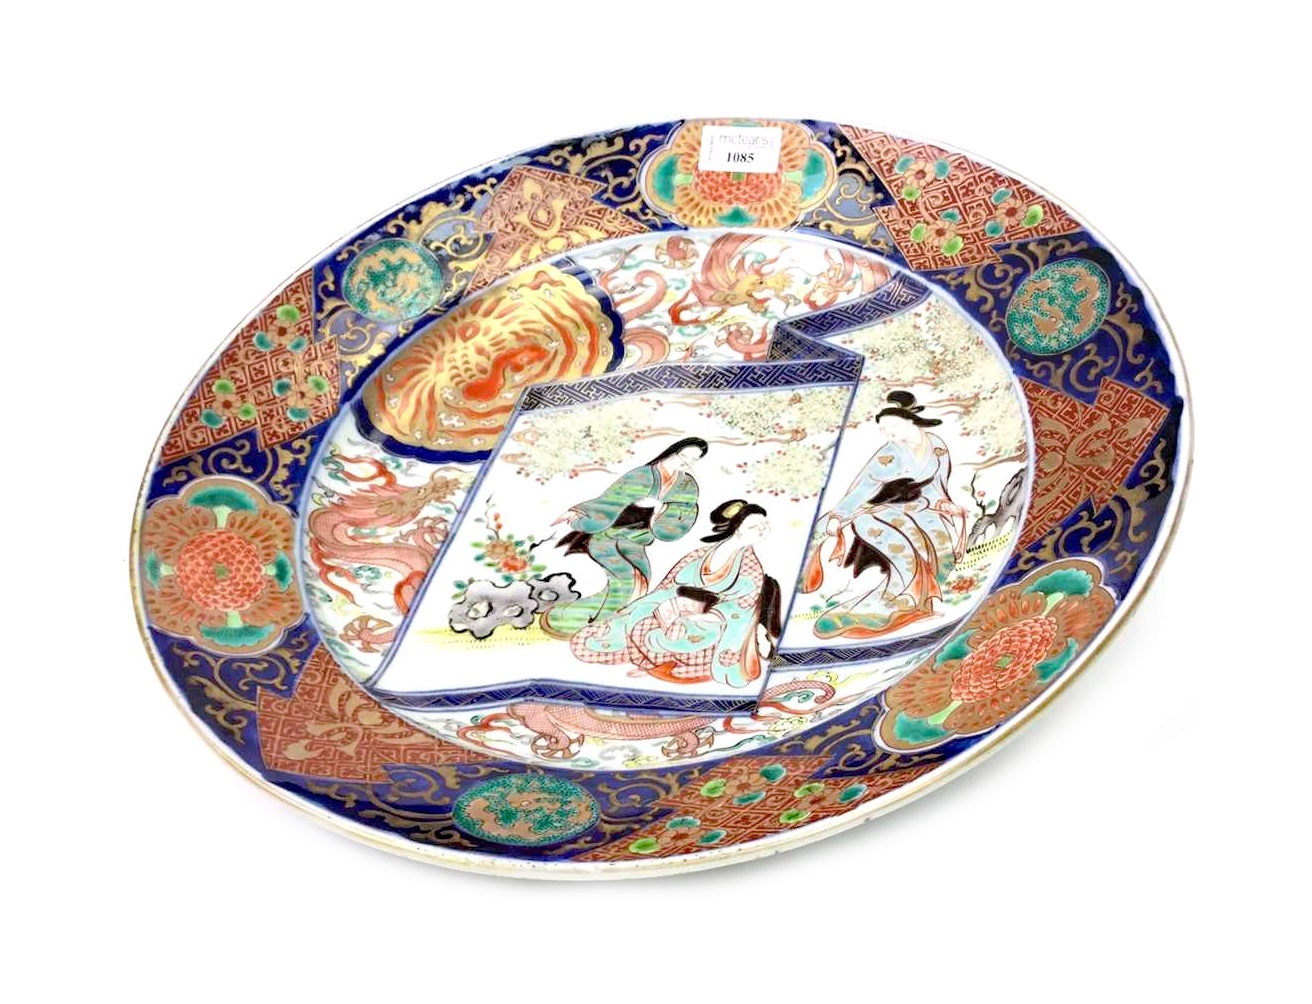 AN EARLY 20TH CENTURY JAPANESE IMARI CHARGER